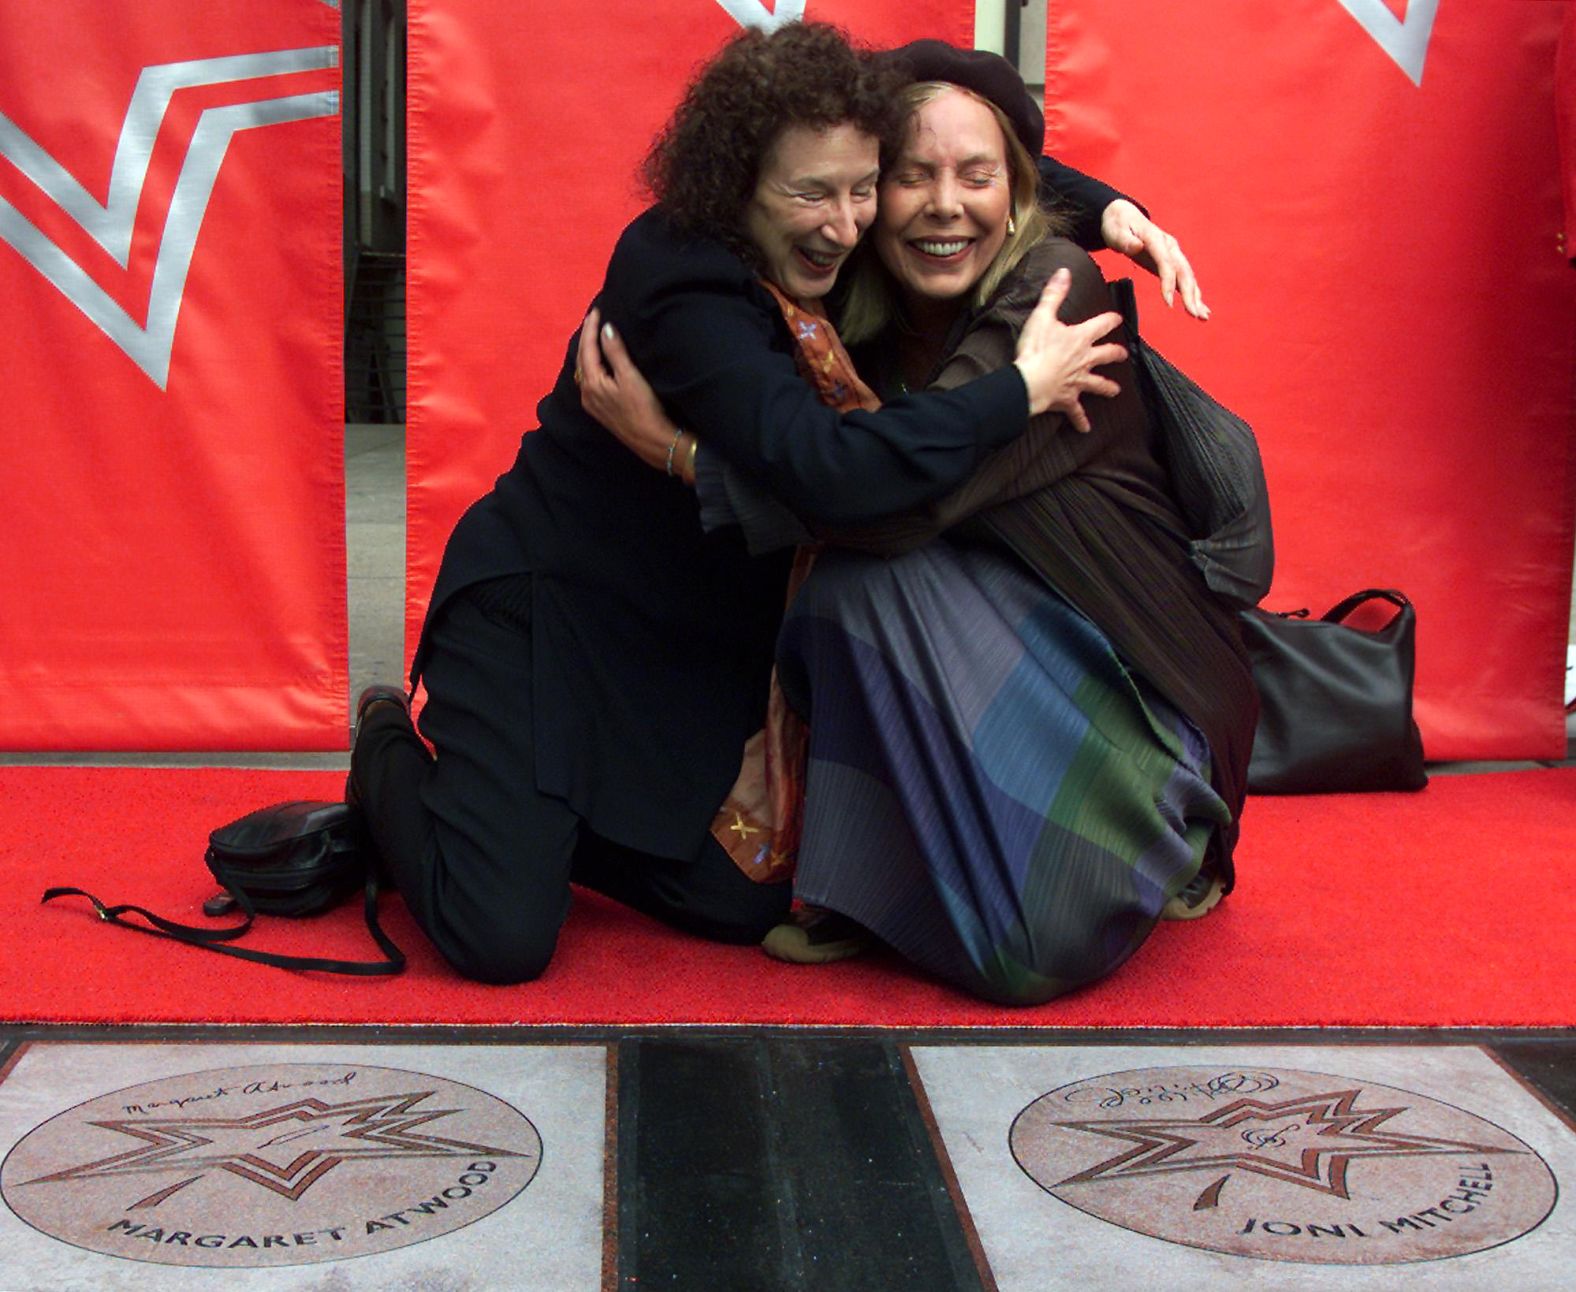 Author Margaret Atwood and Mitchell hug each other after unveiling their stars on the Canada Walk of Fame in 2001.